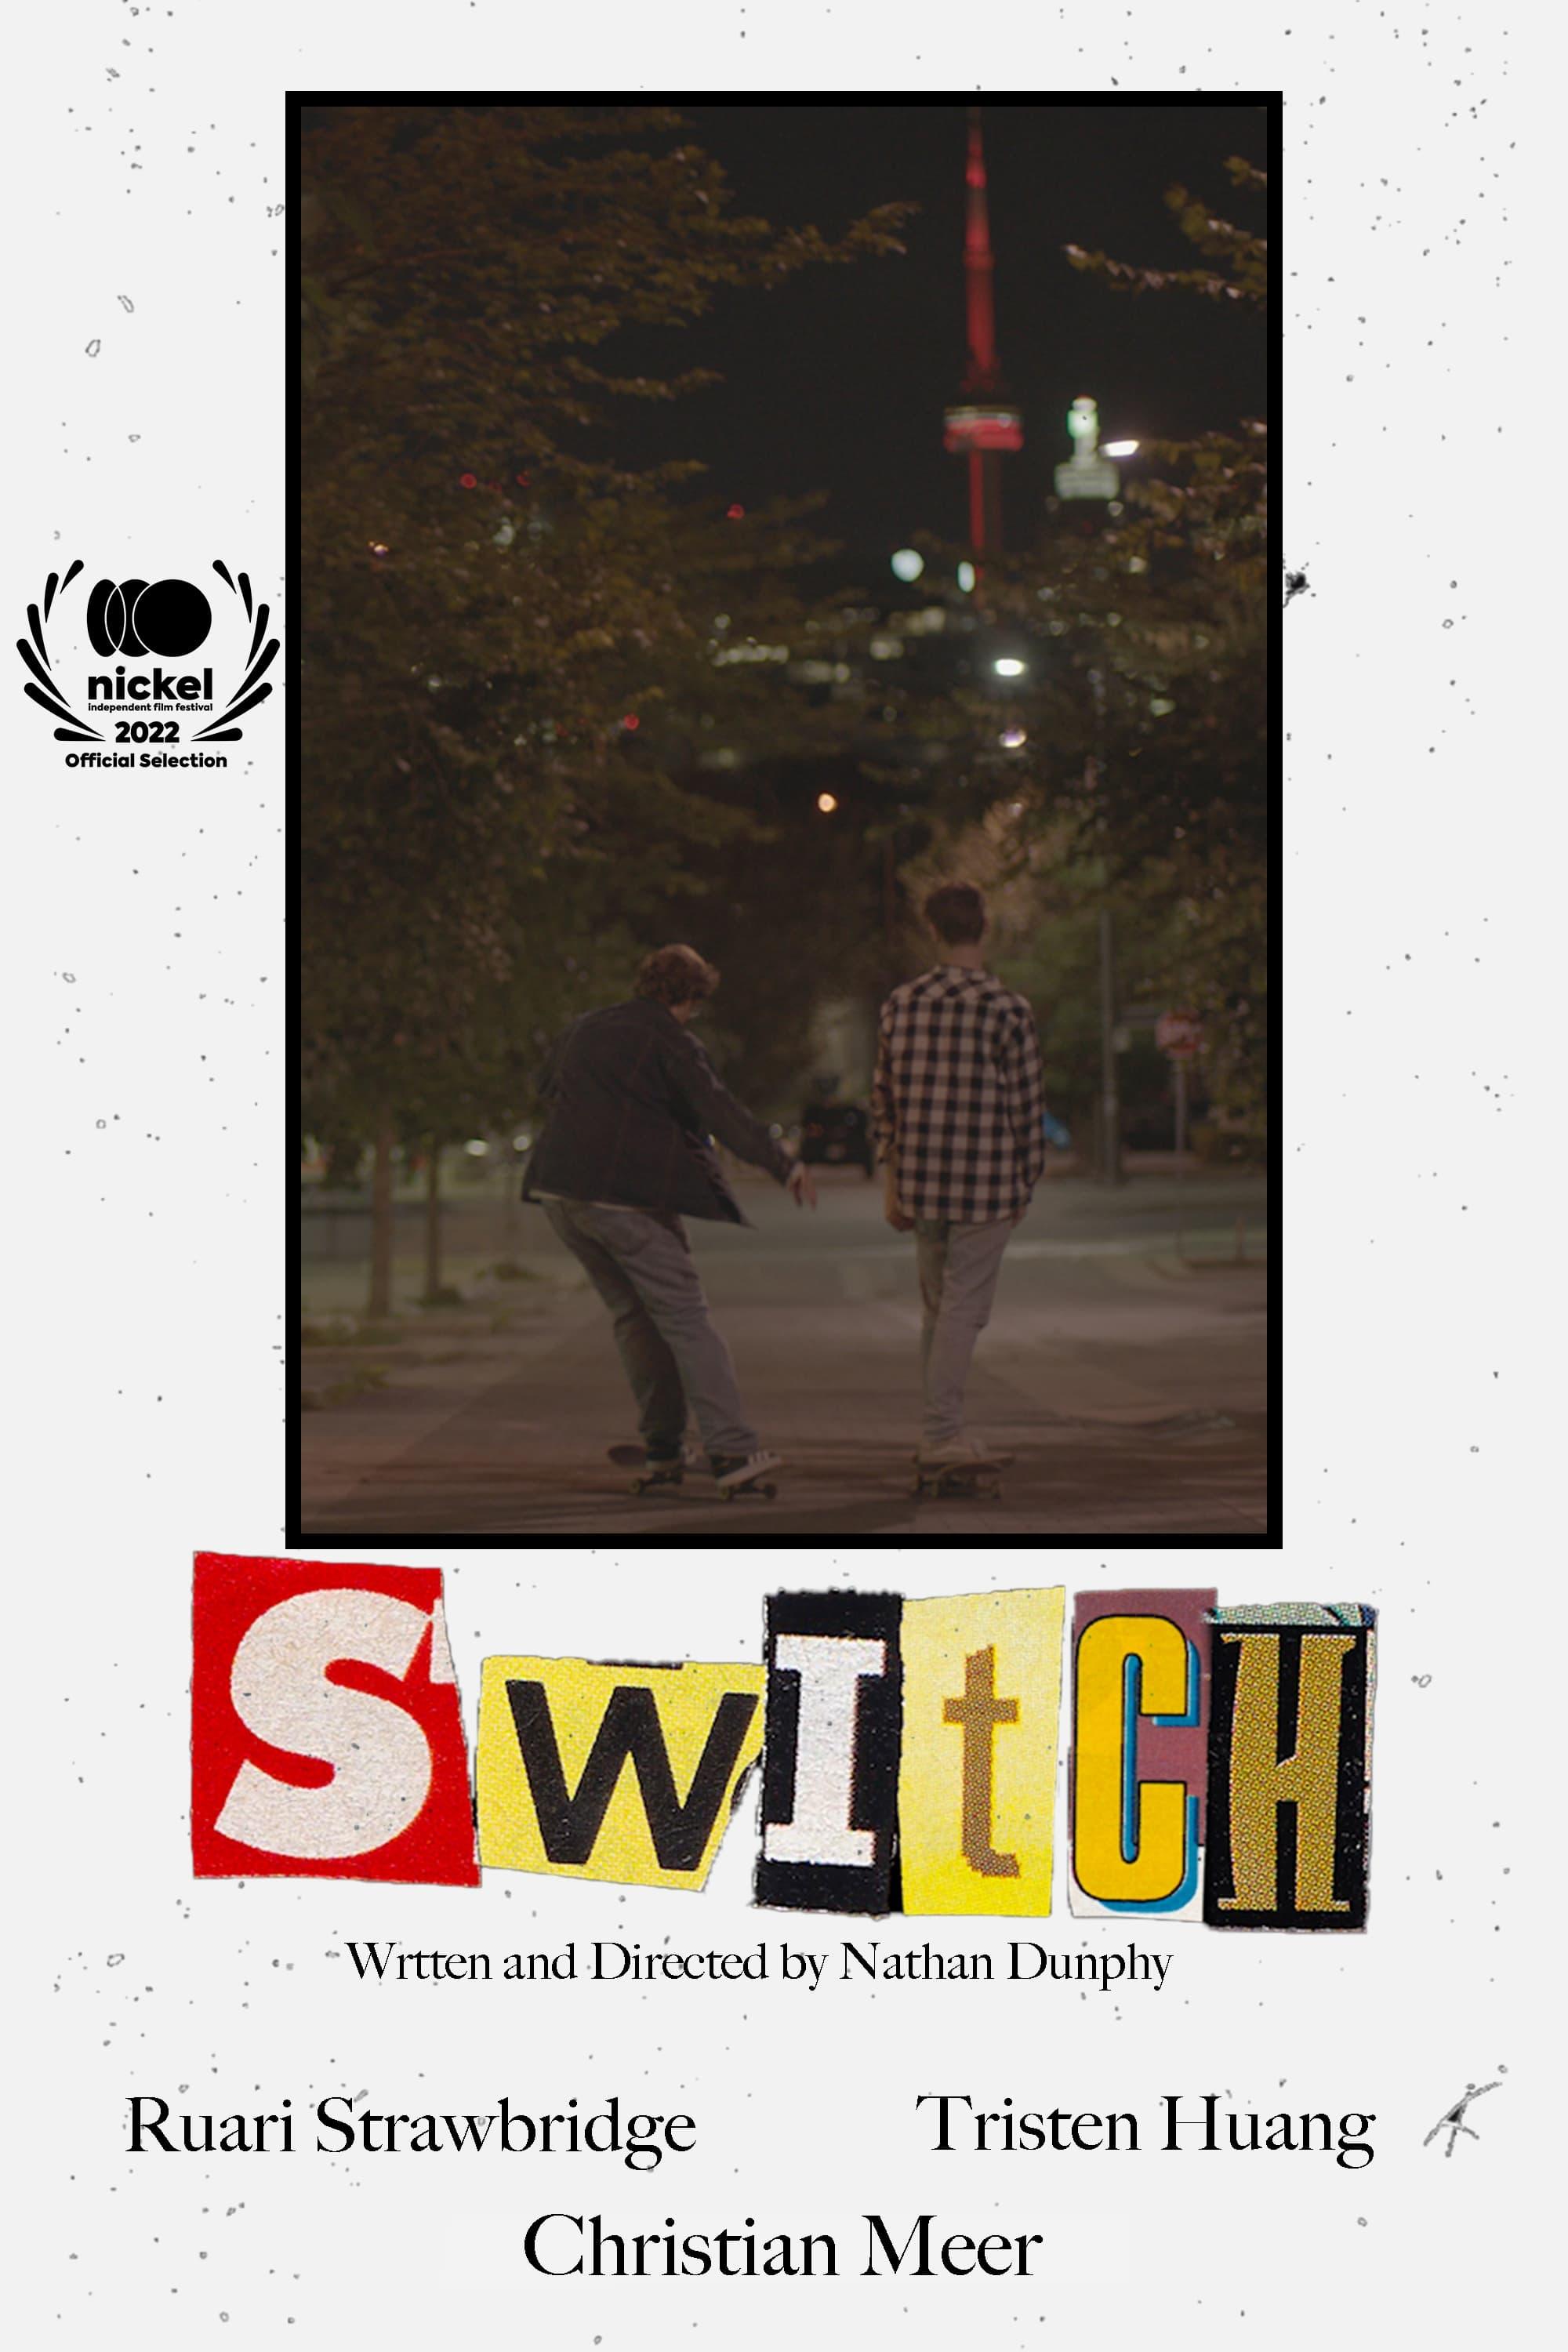 Switch poster